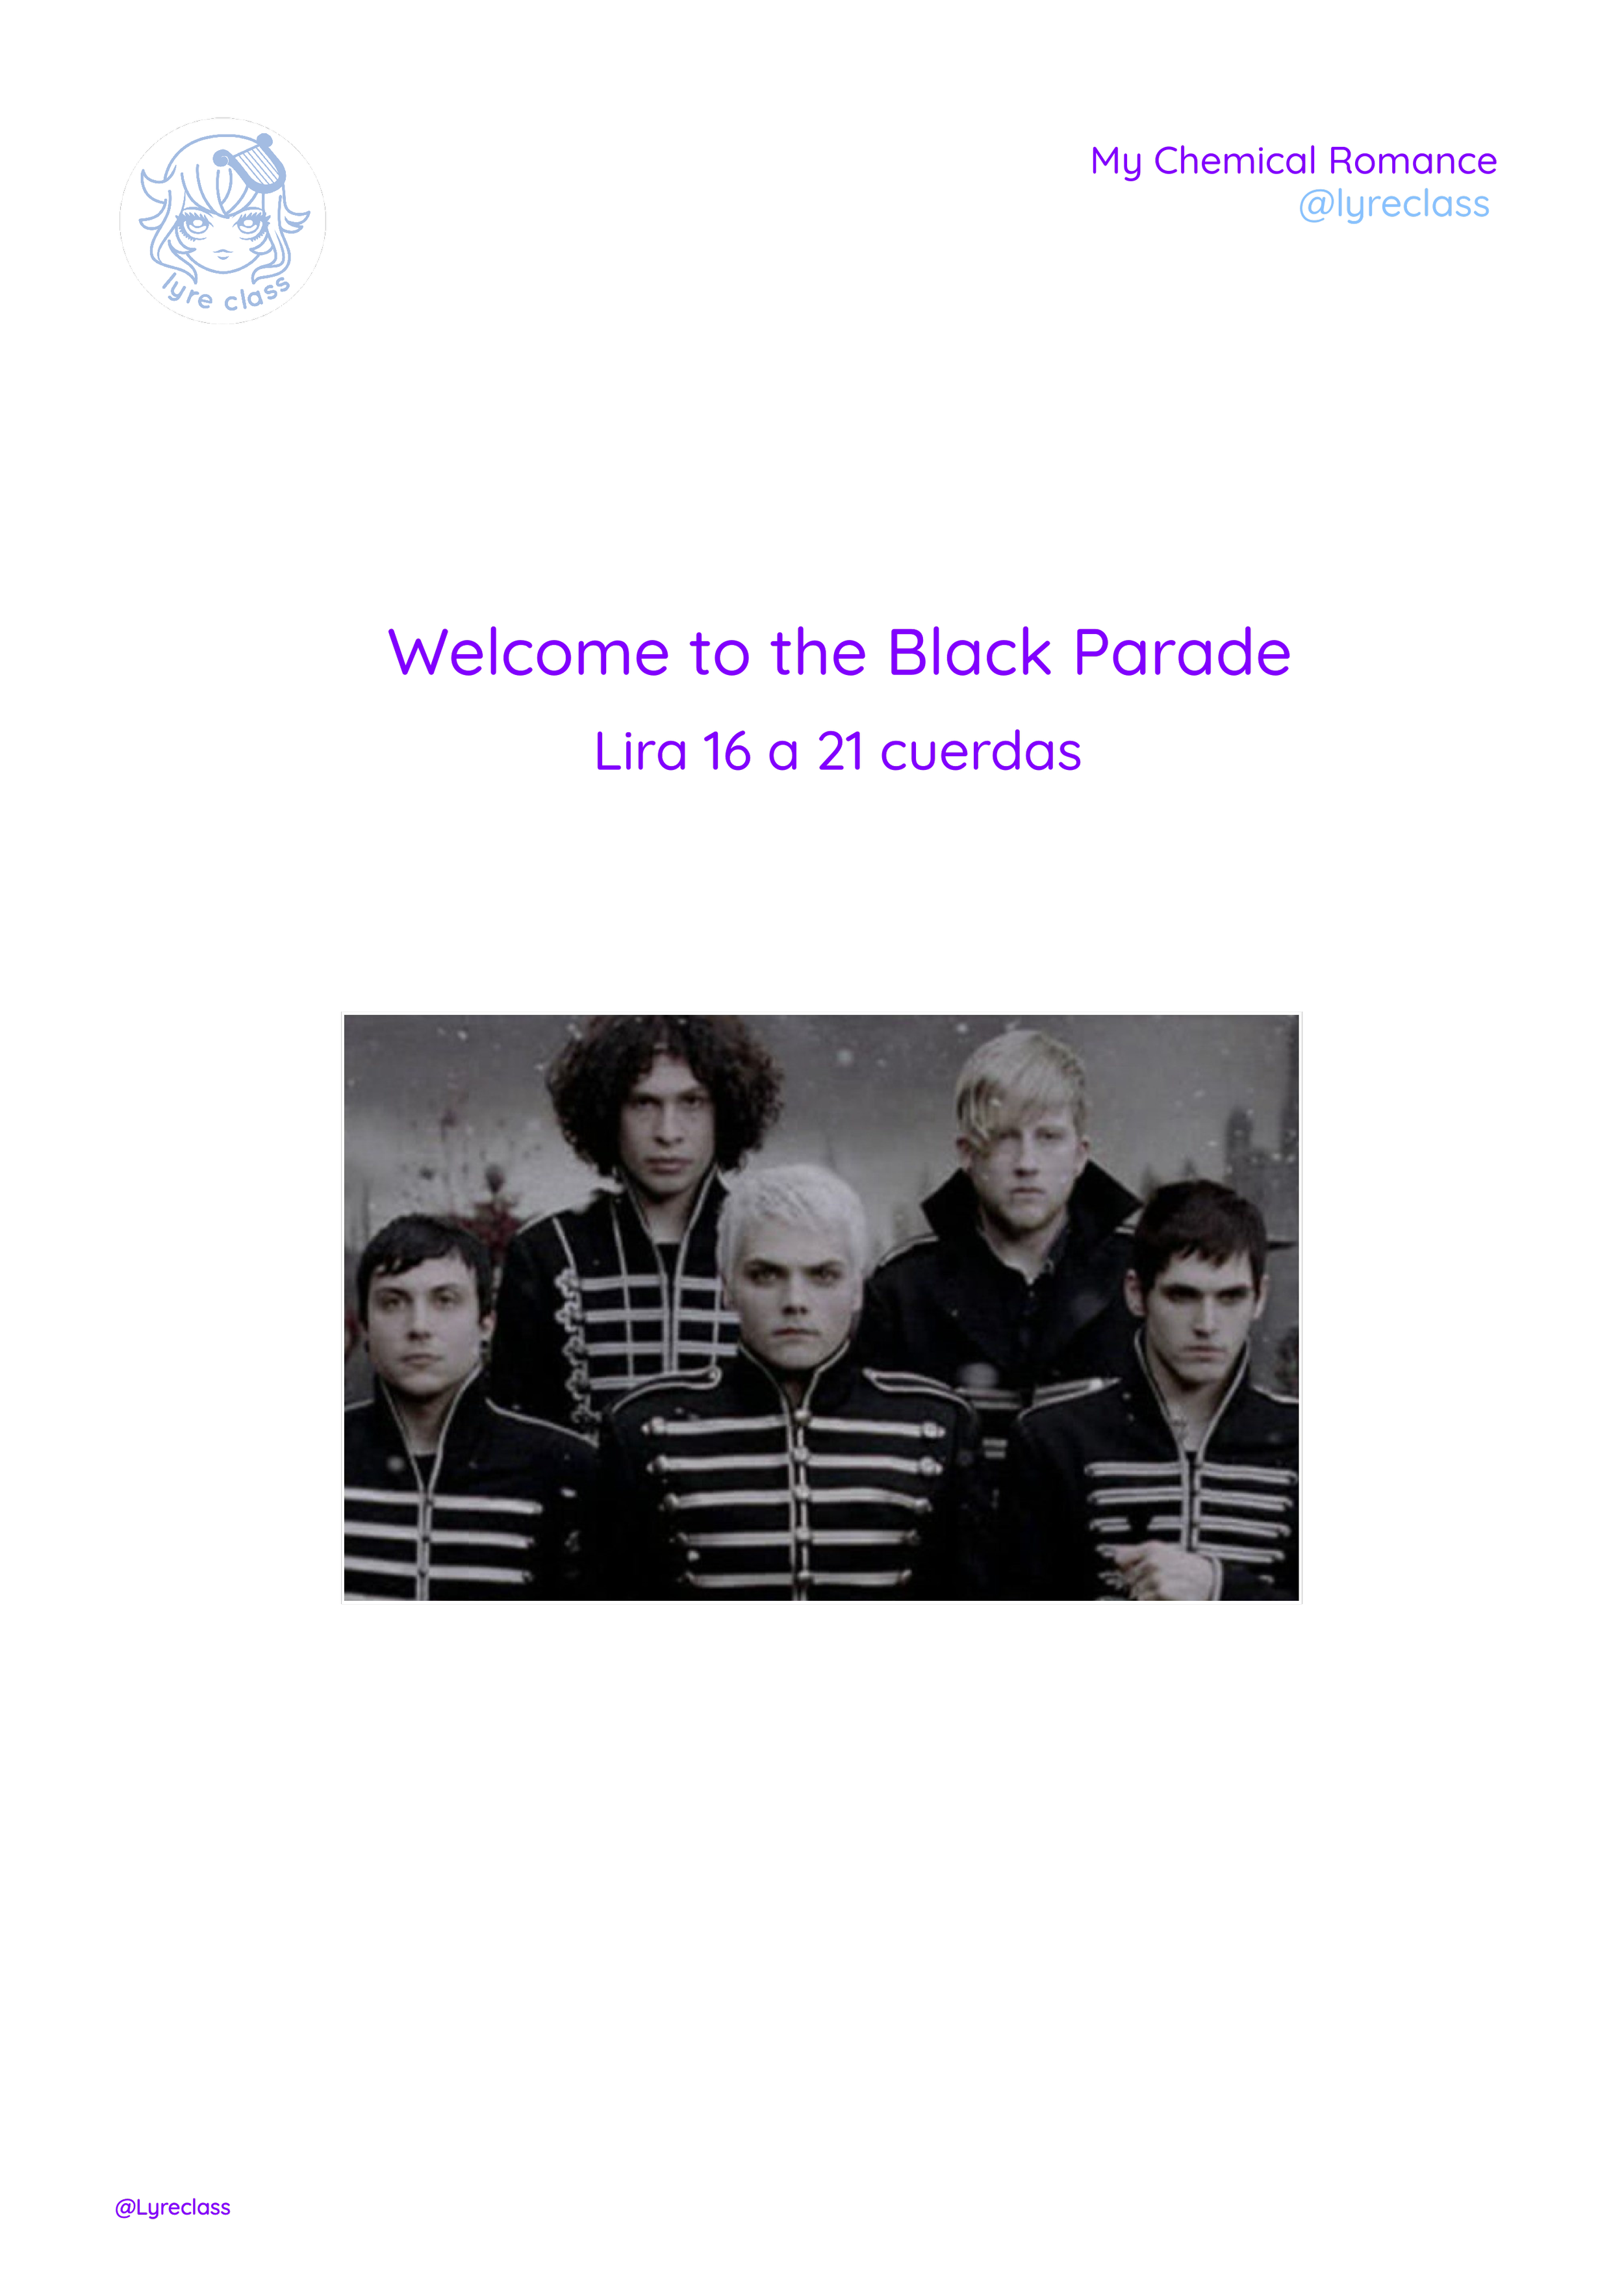 Welcome to the Black Parade by My Chemical